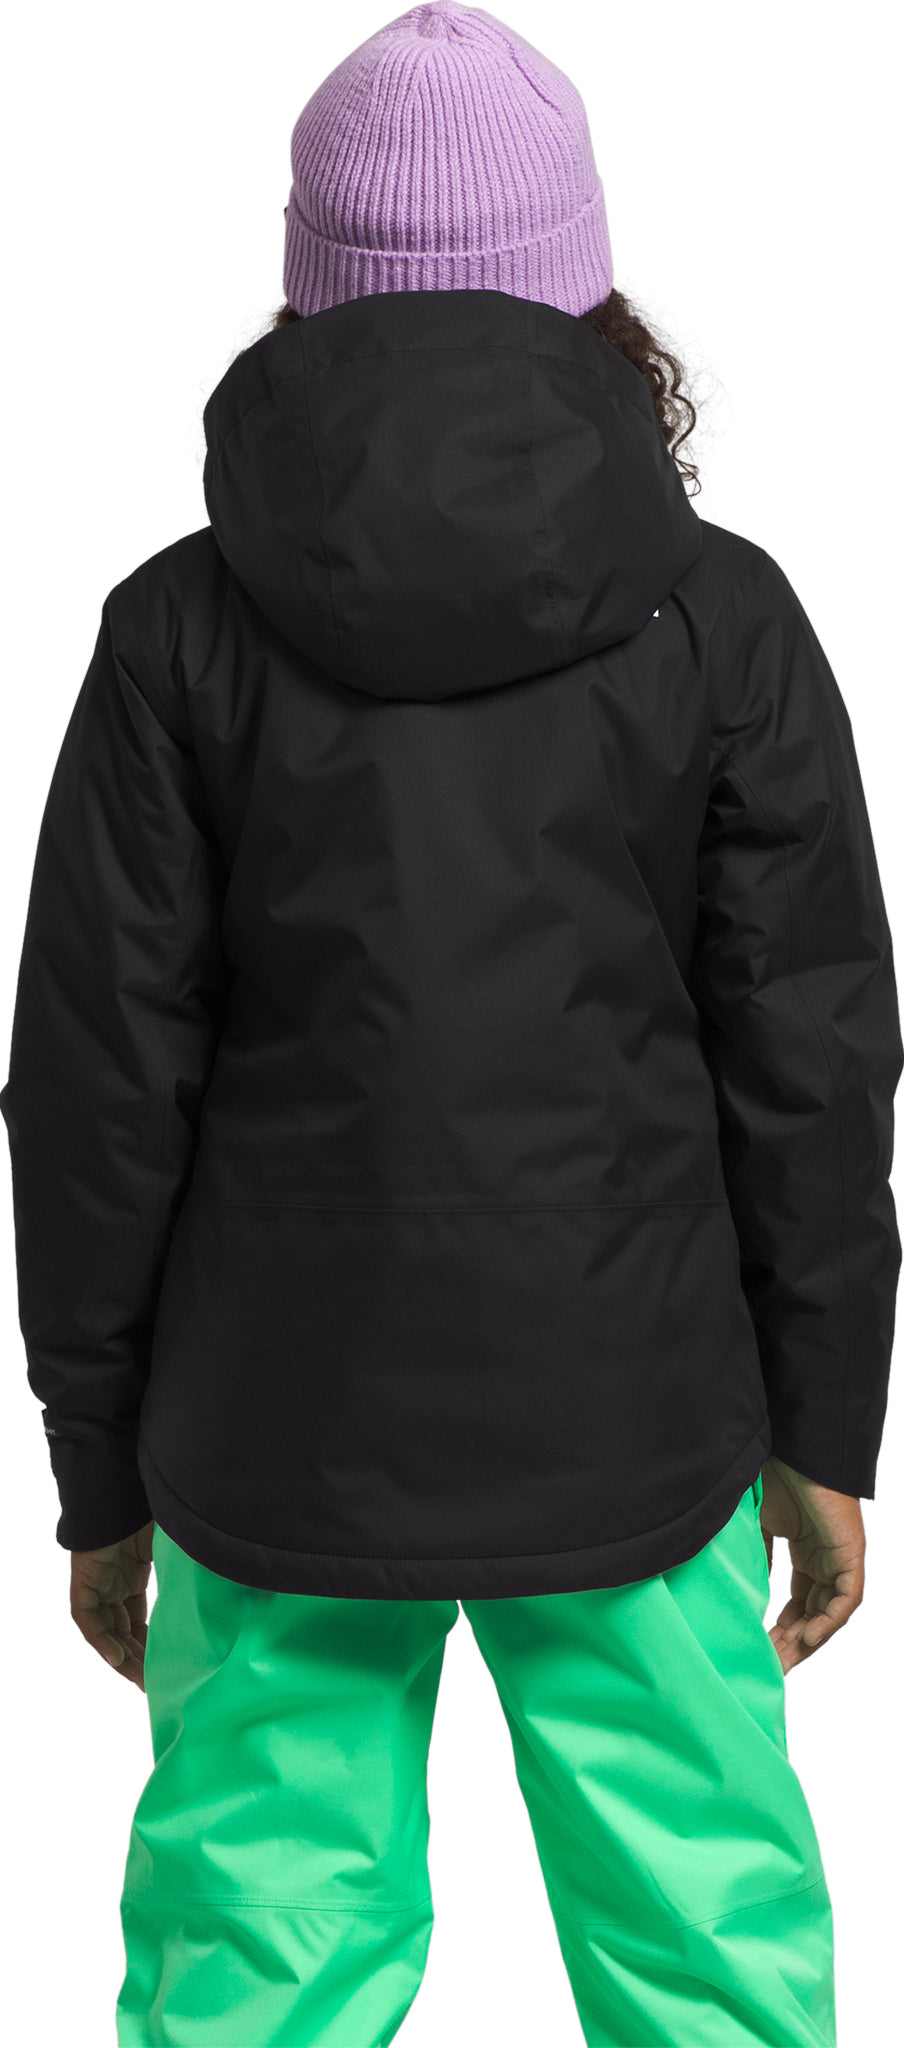 The North Face Freedom Insulated Jacket - Girls